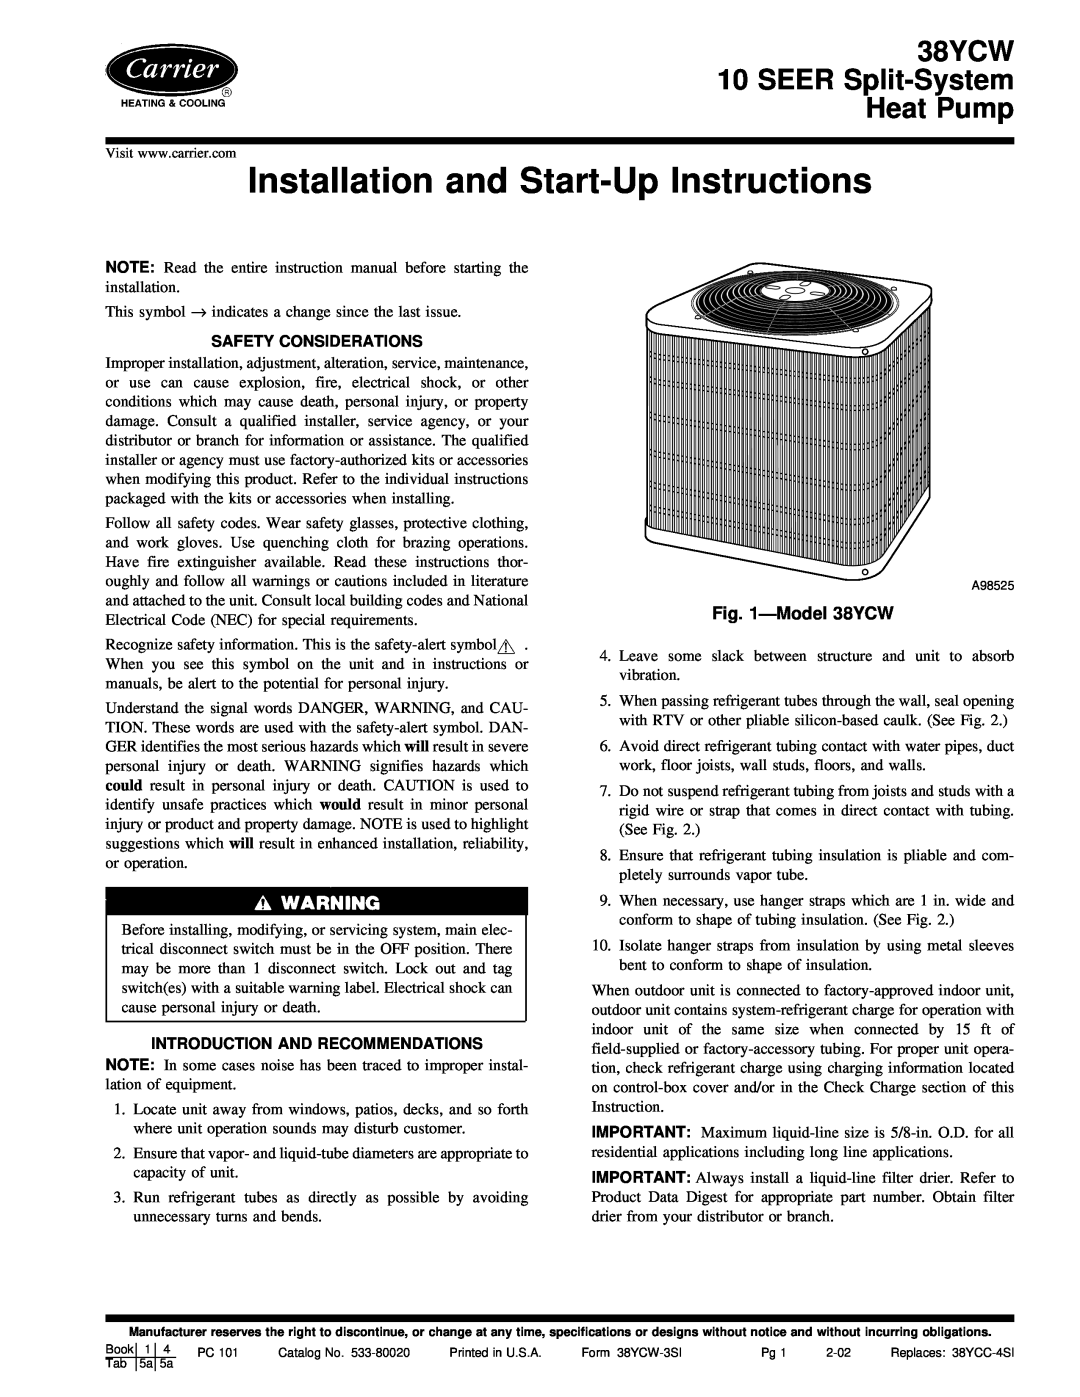 Carrier instruction manual Model38YCW, Safety Considerations, Introduction And Recommendations 